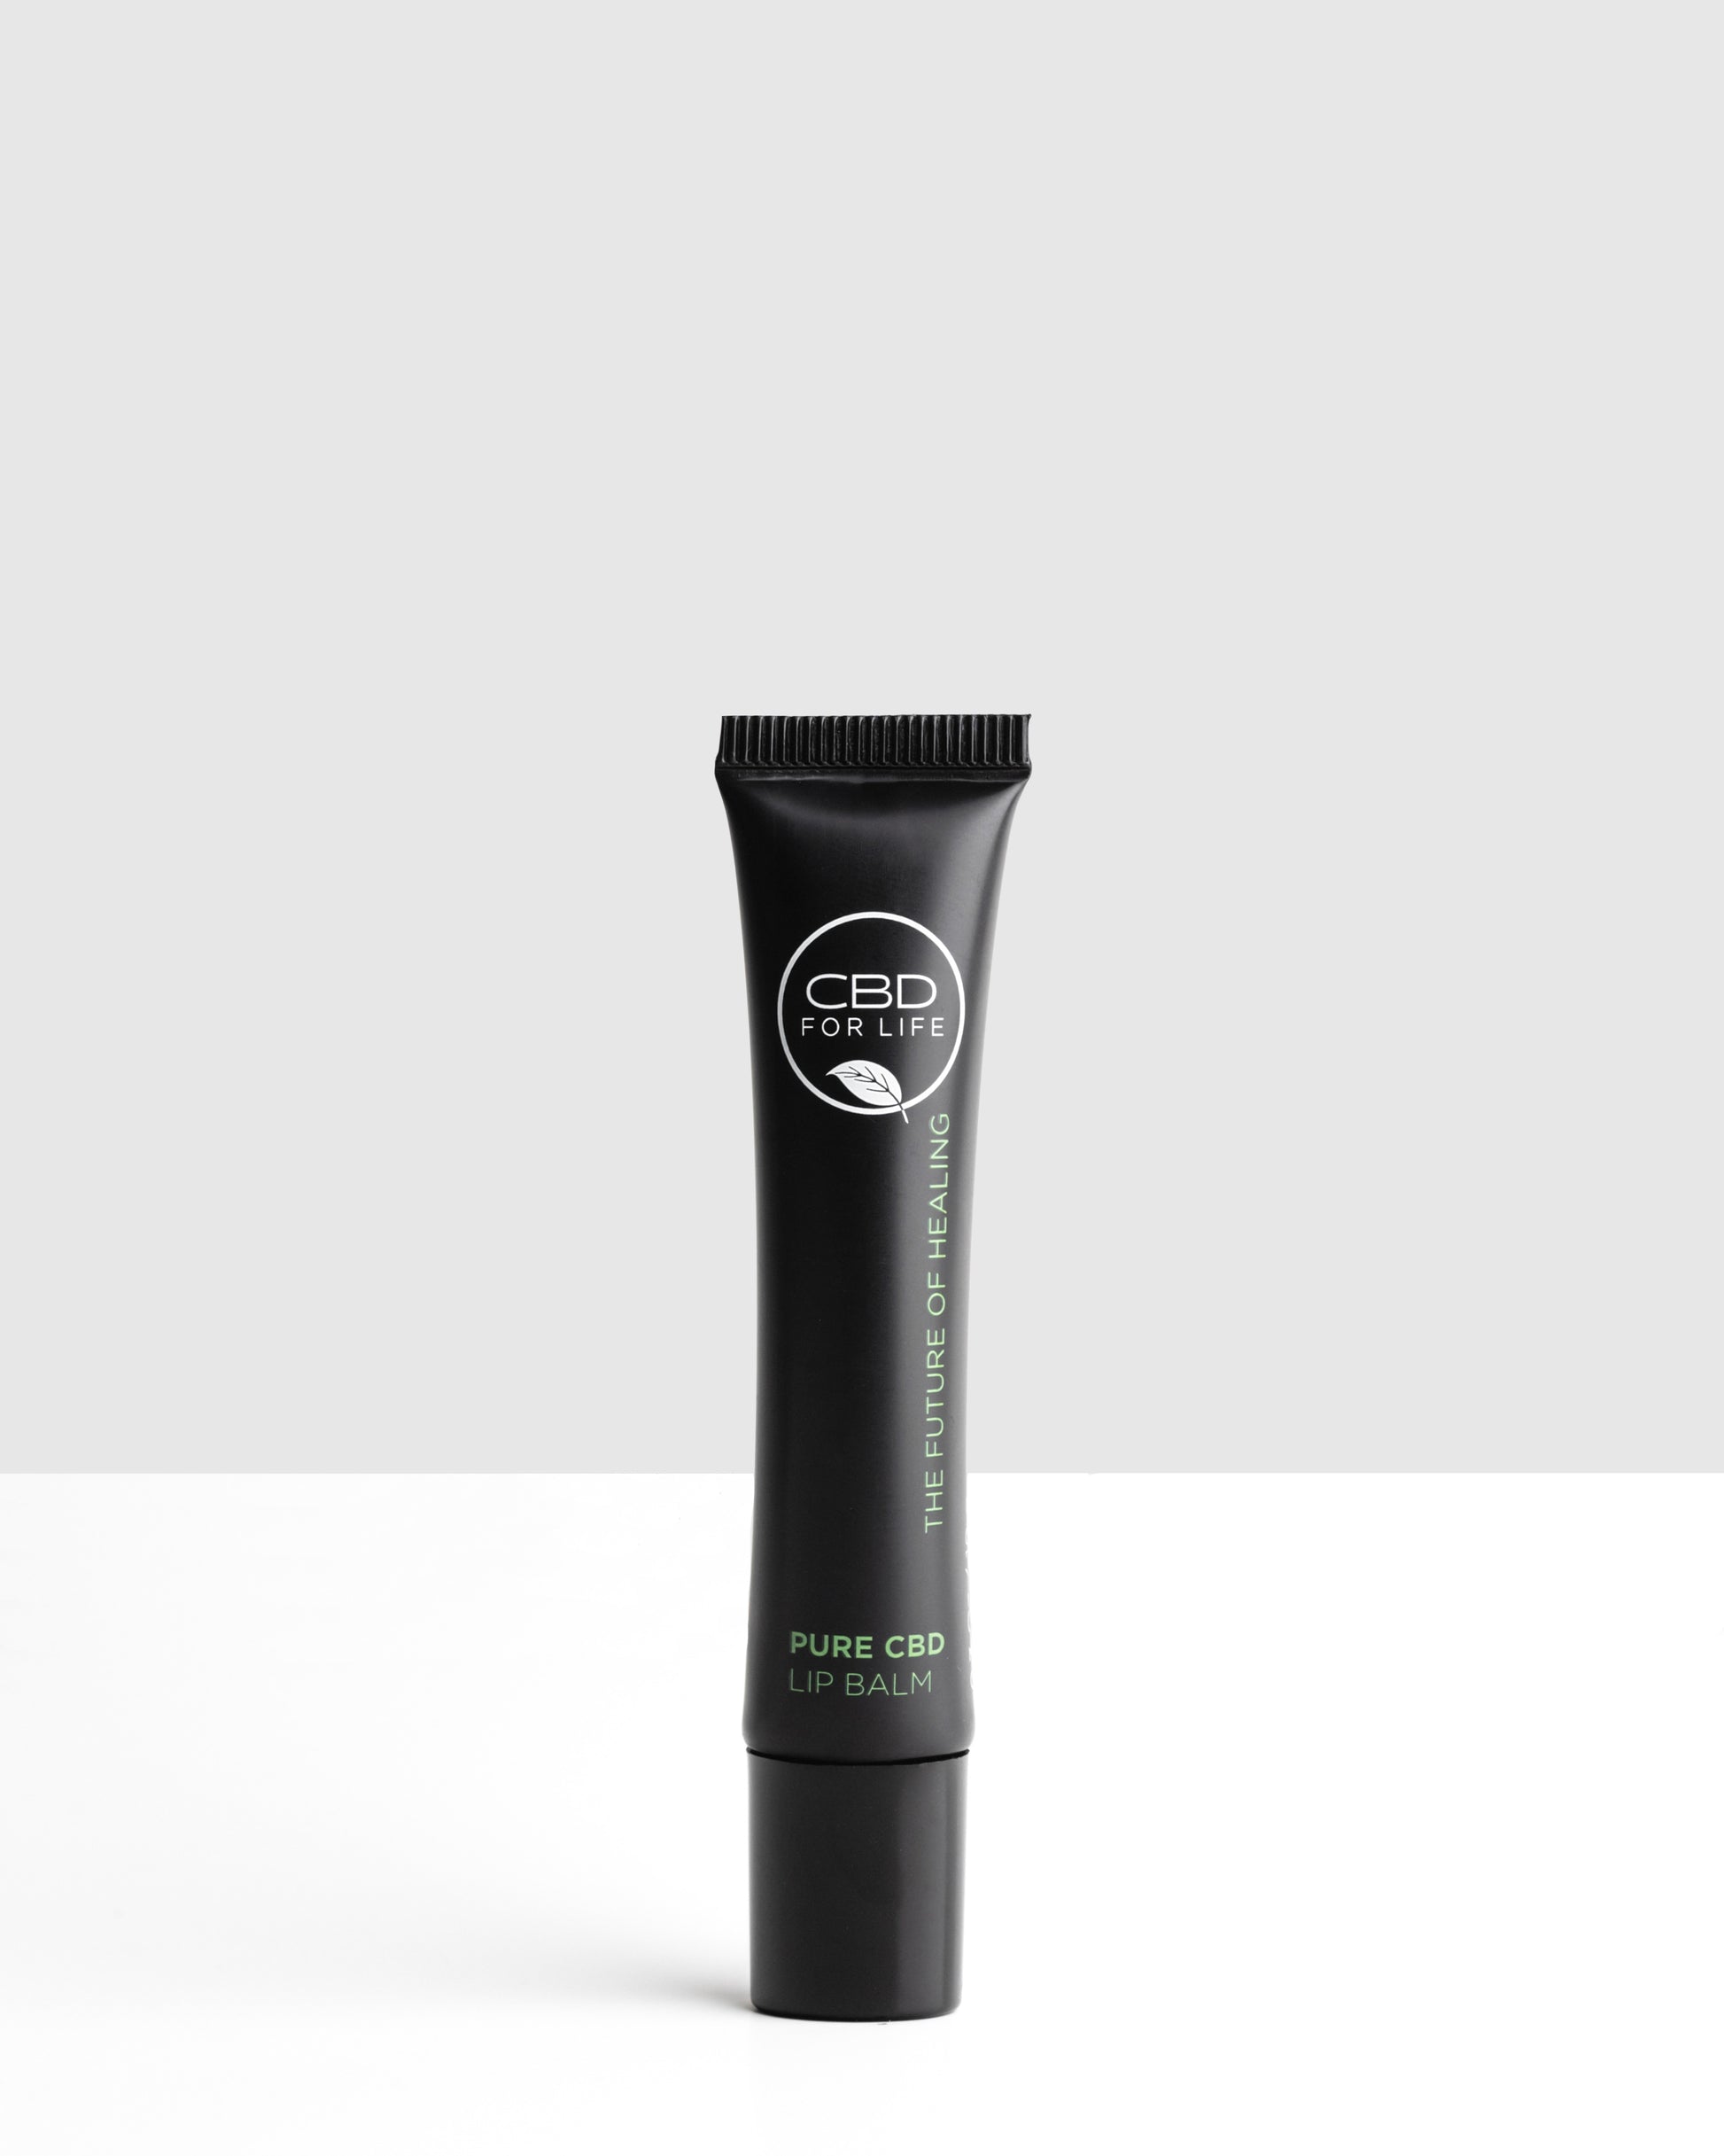 Soften lips in one swipe with CBD chapstick. Slip on our fan-favorite CBD lip balm and feel it go to work. The skin-conditioning benefits of phytonutrient-rich CBD, plus coconut and castor seed oil, help to comfort lips on contact. CBD is among a host of ingredients in our CBD Lip Balm to help with dry, chapped, uncomfortable lips. We use CBD, coconut oil, shea butter and other emollient ingredients to help comfort and condition lips. Use our CBD Lip Balm as needed. 